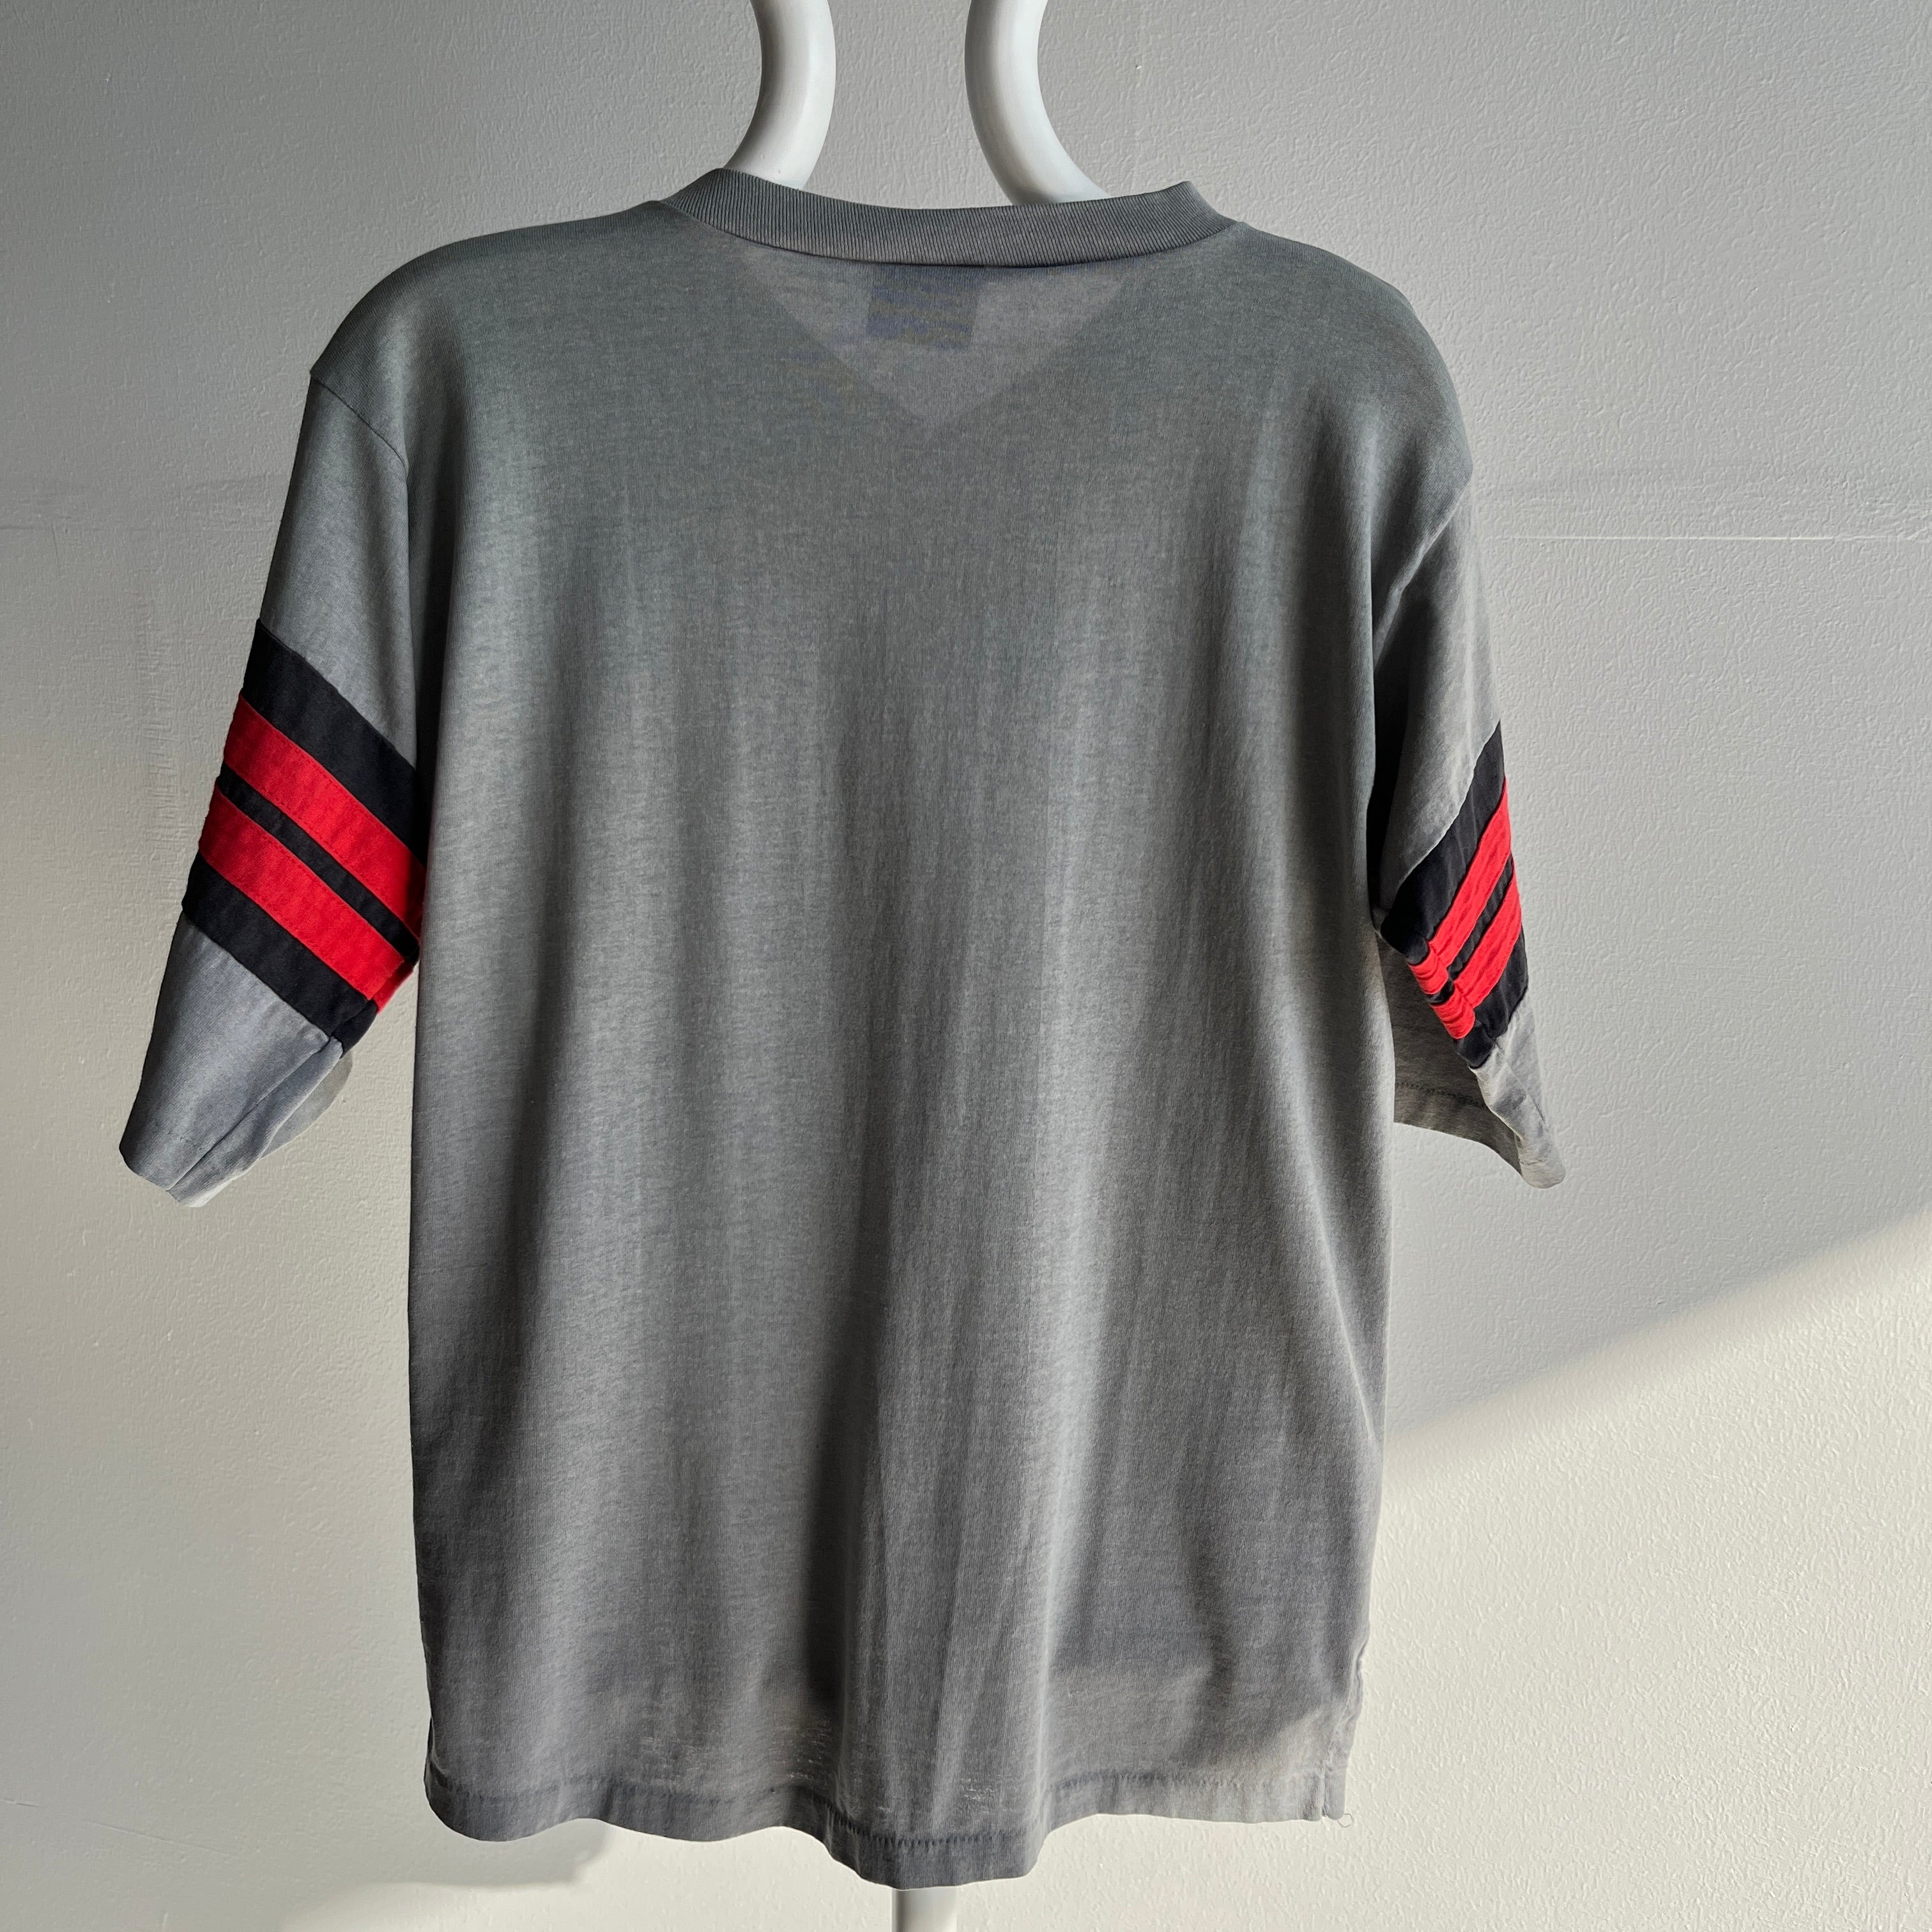 1980s Sun Faded and Worn Football T-Shirt with Faint Pit Staining by Wright